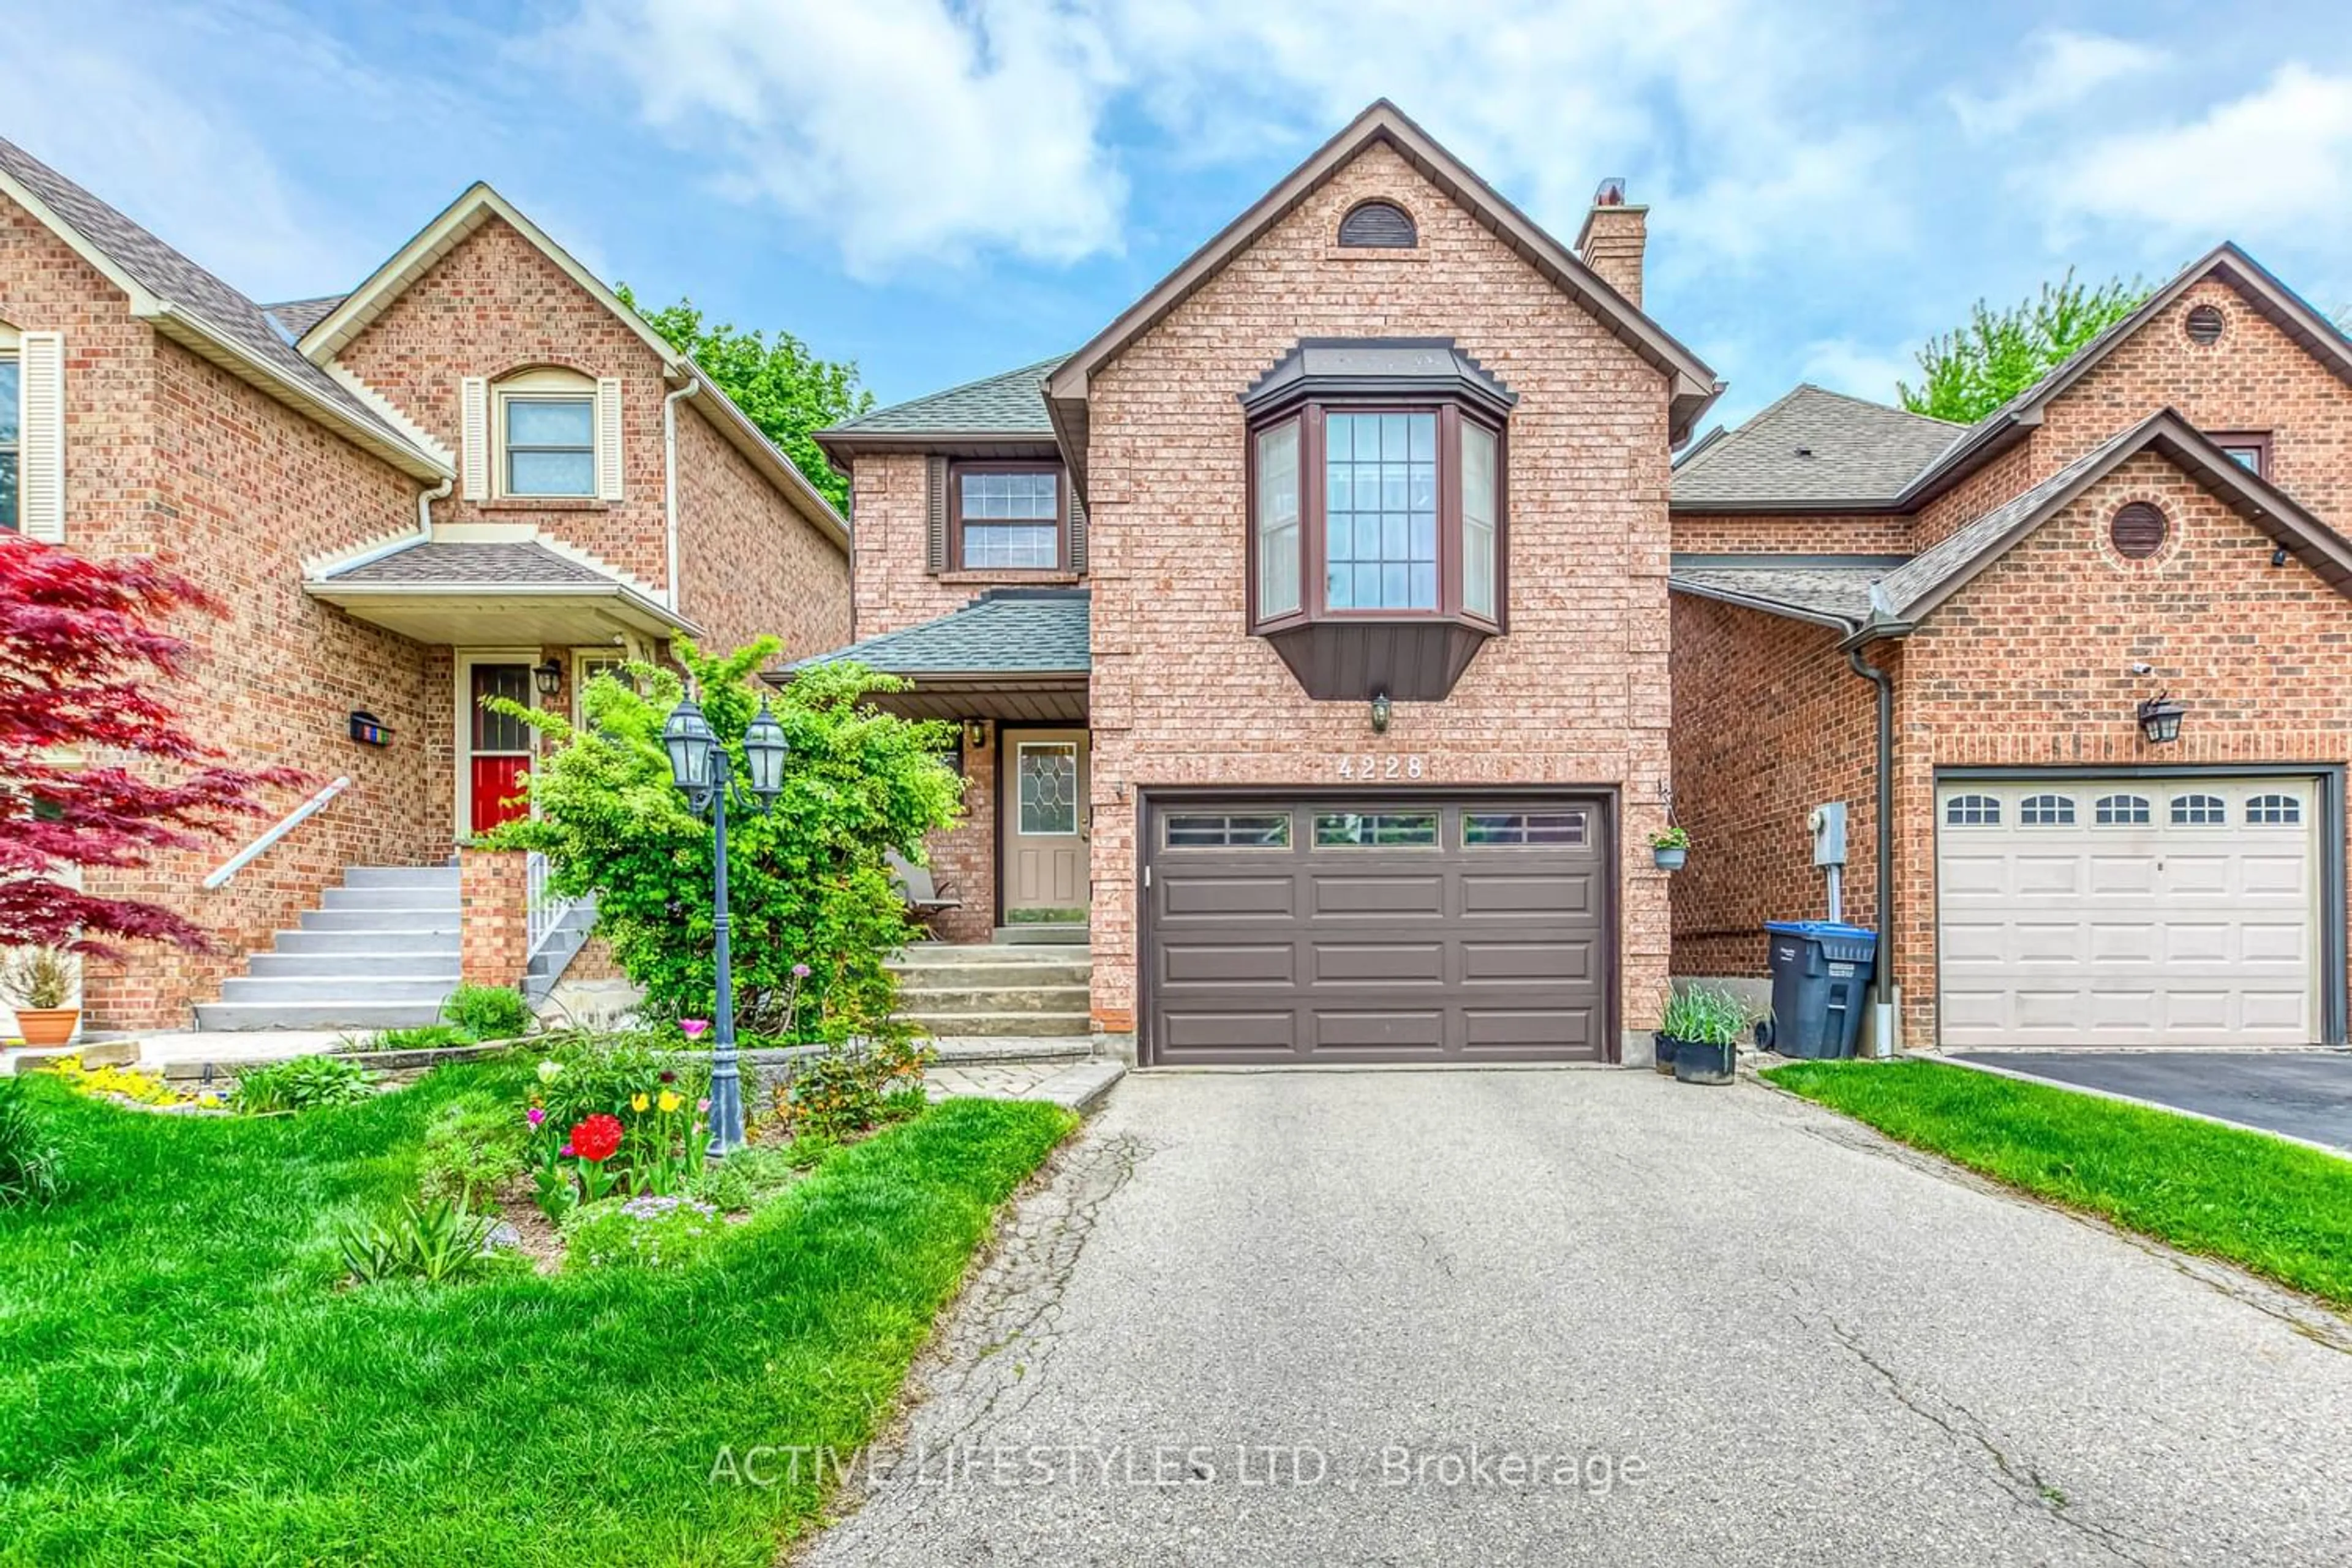 Home with brick exterior material for 4228 Lastrada Hts, Mississauga Ontario L5C 3W3